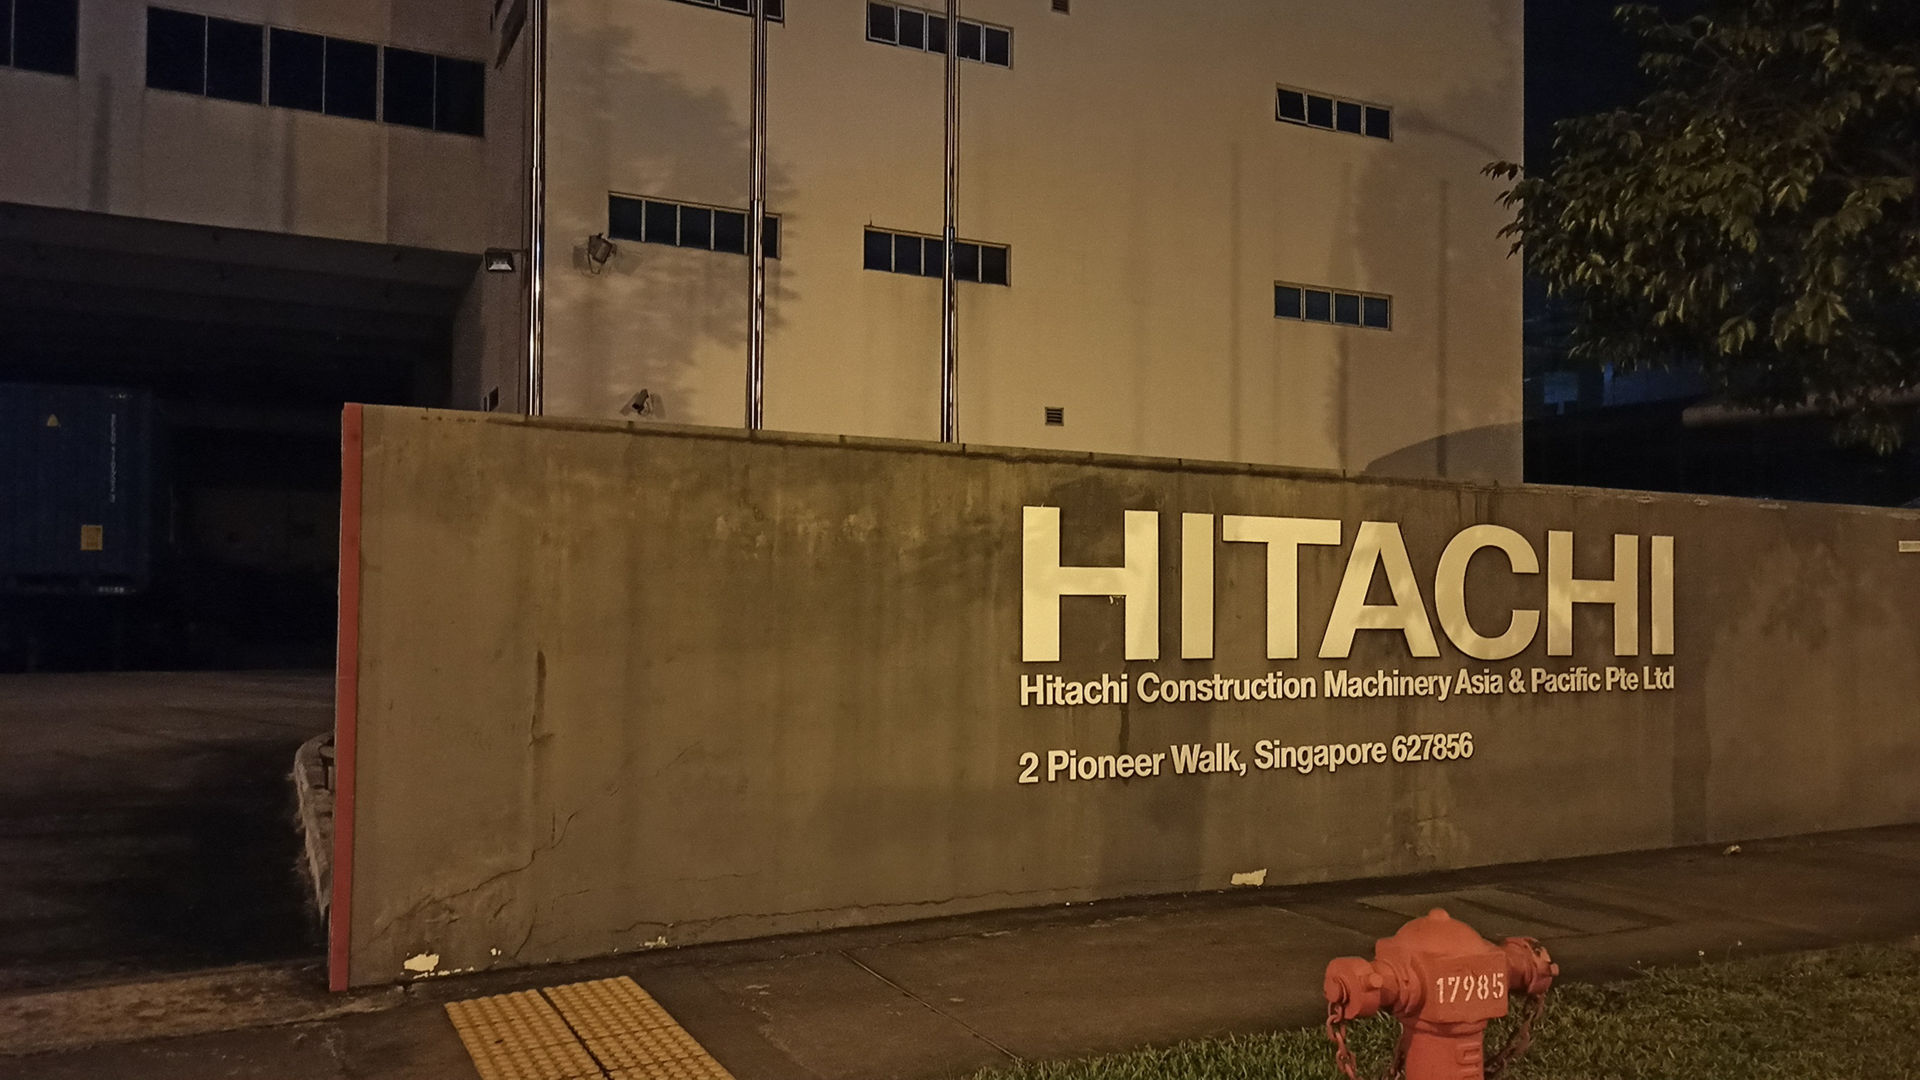 Hitachi Construction Machinery Asia and Pacific